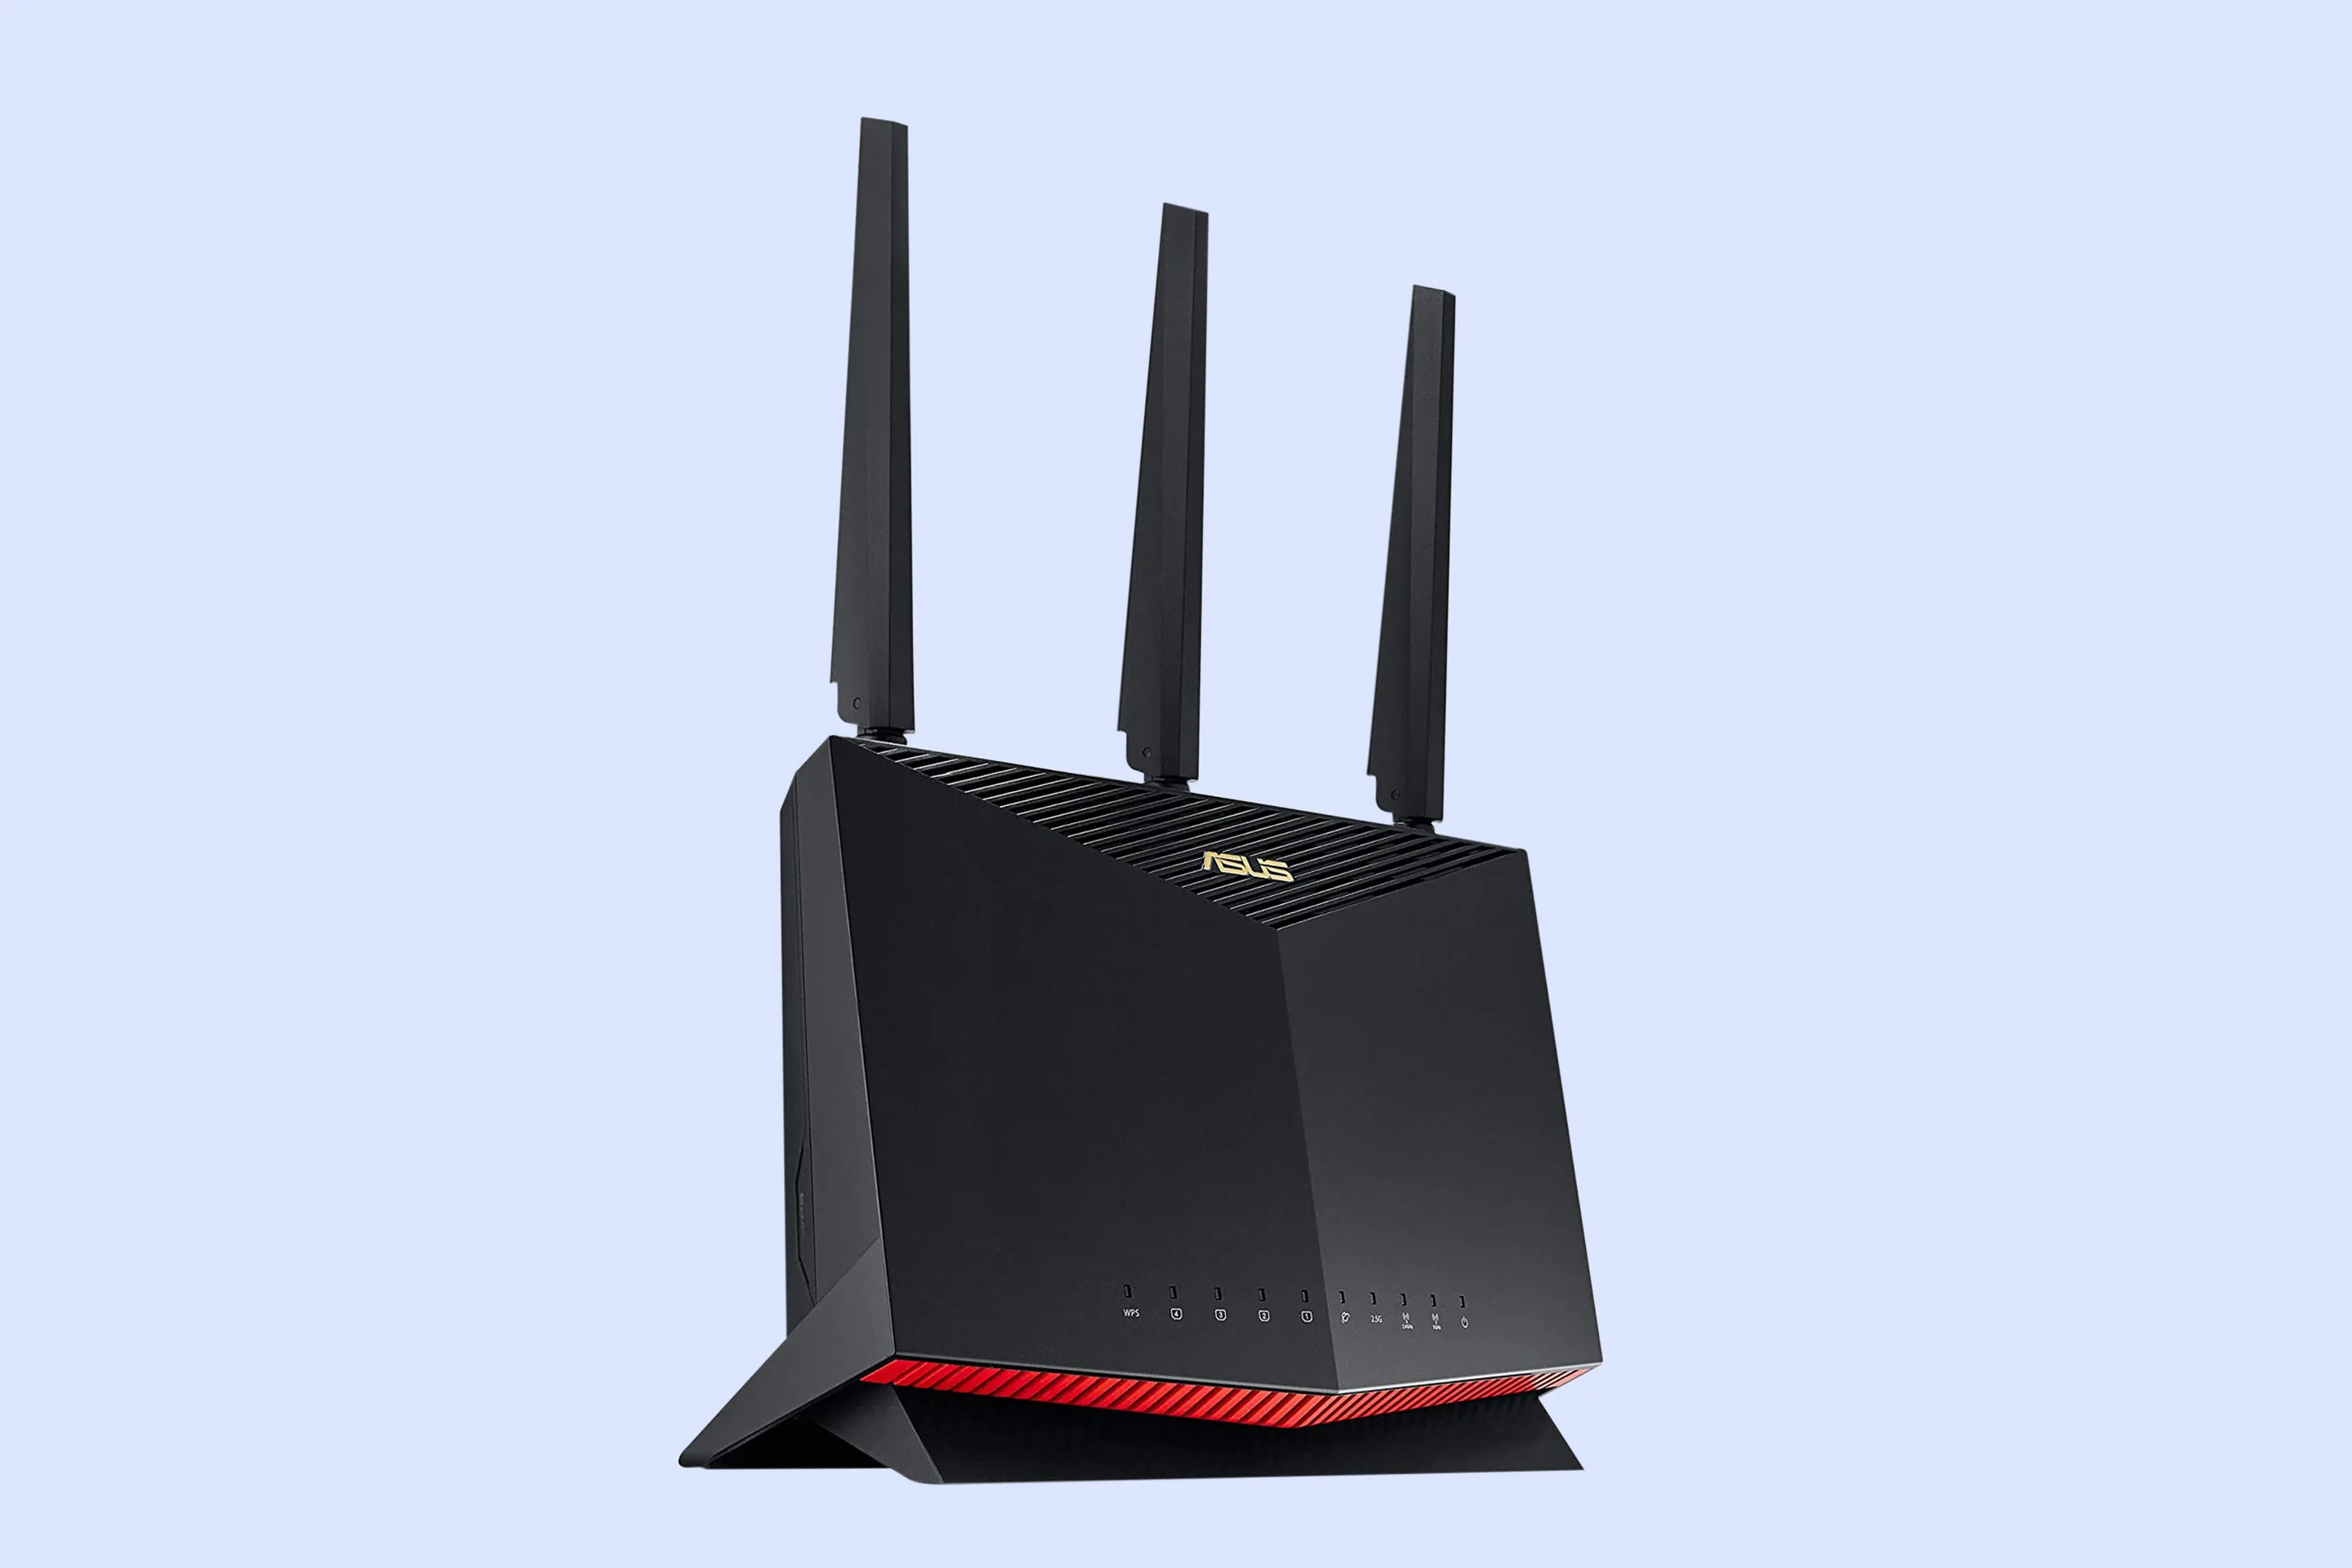 best wireless router for streaming hd video